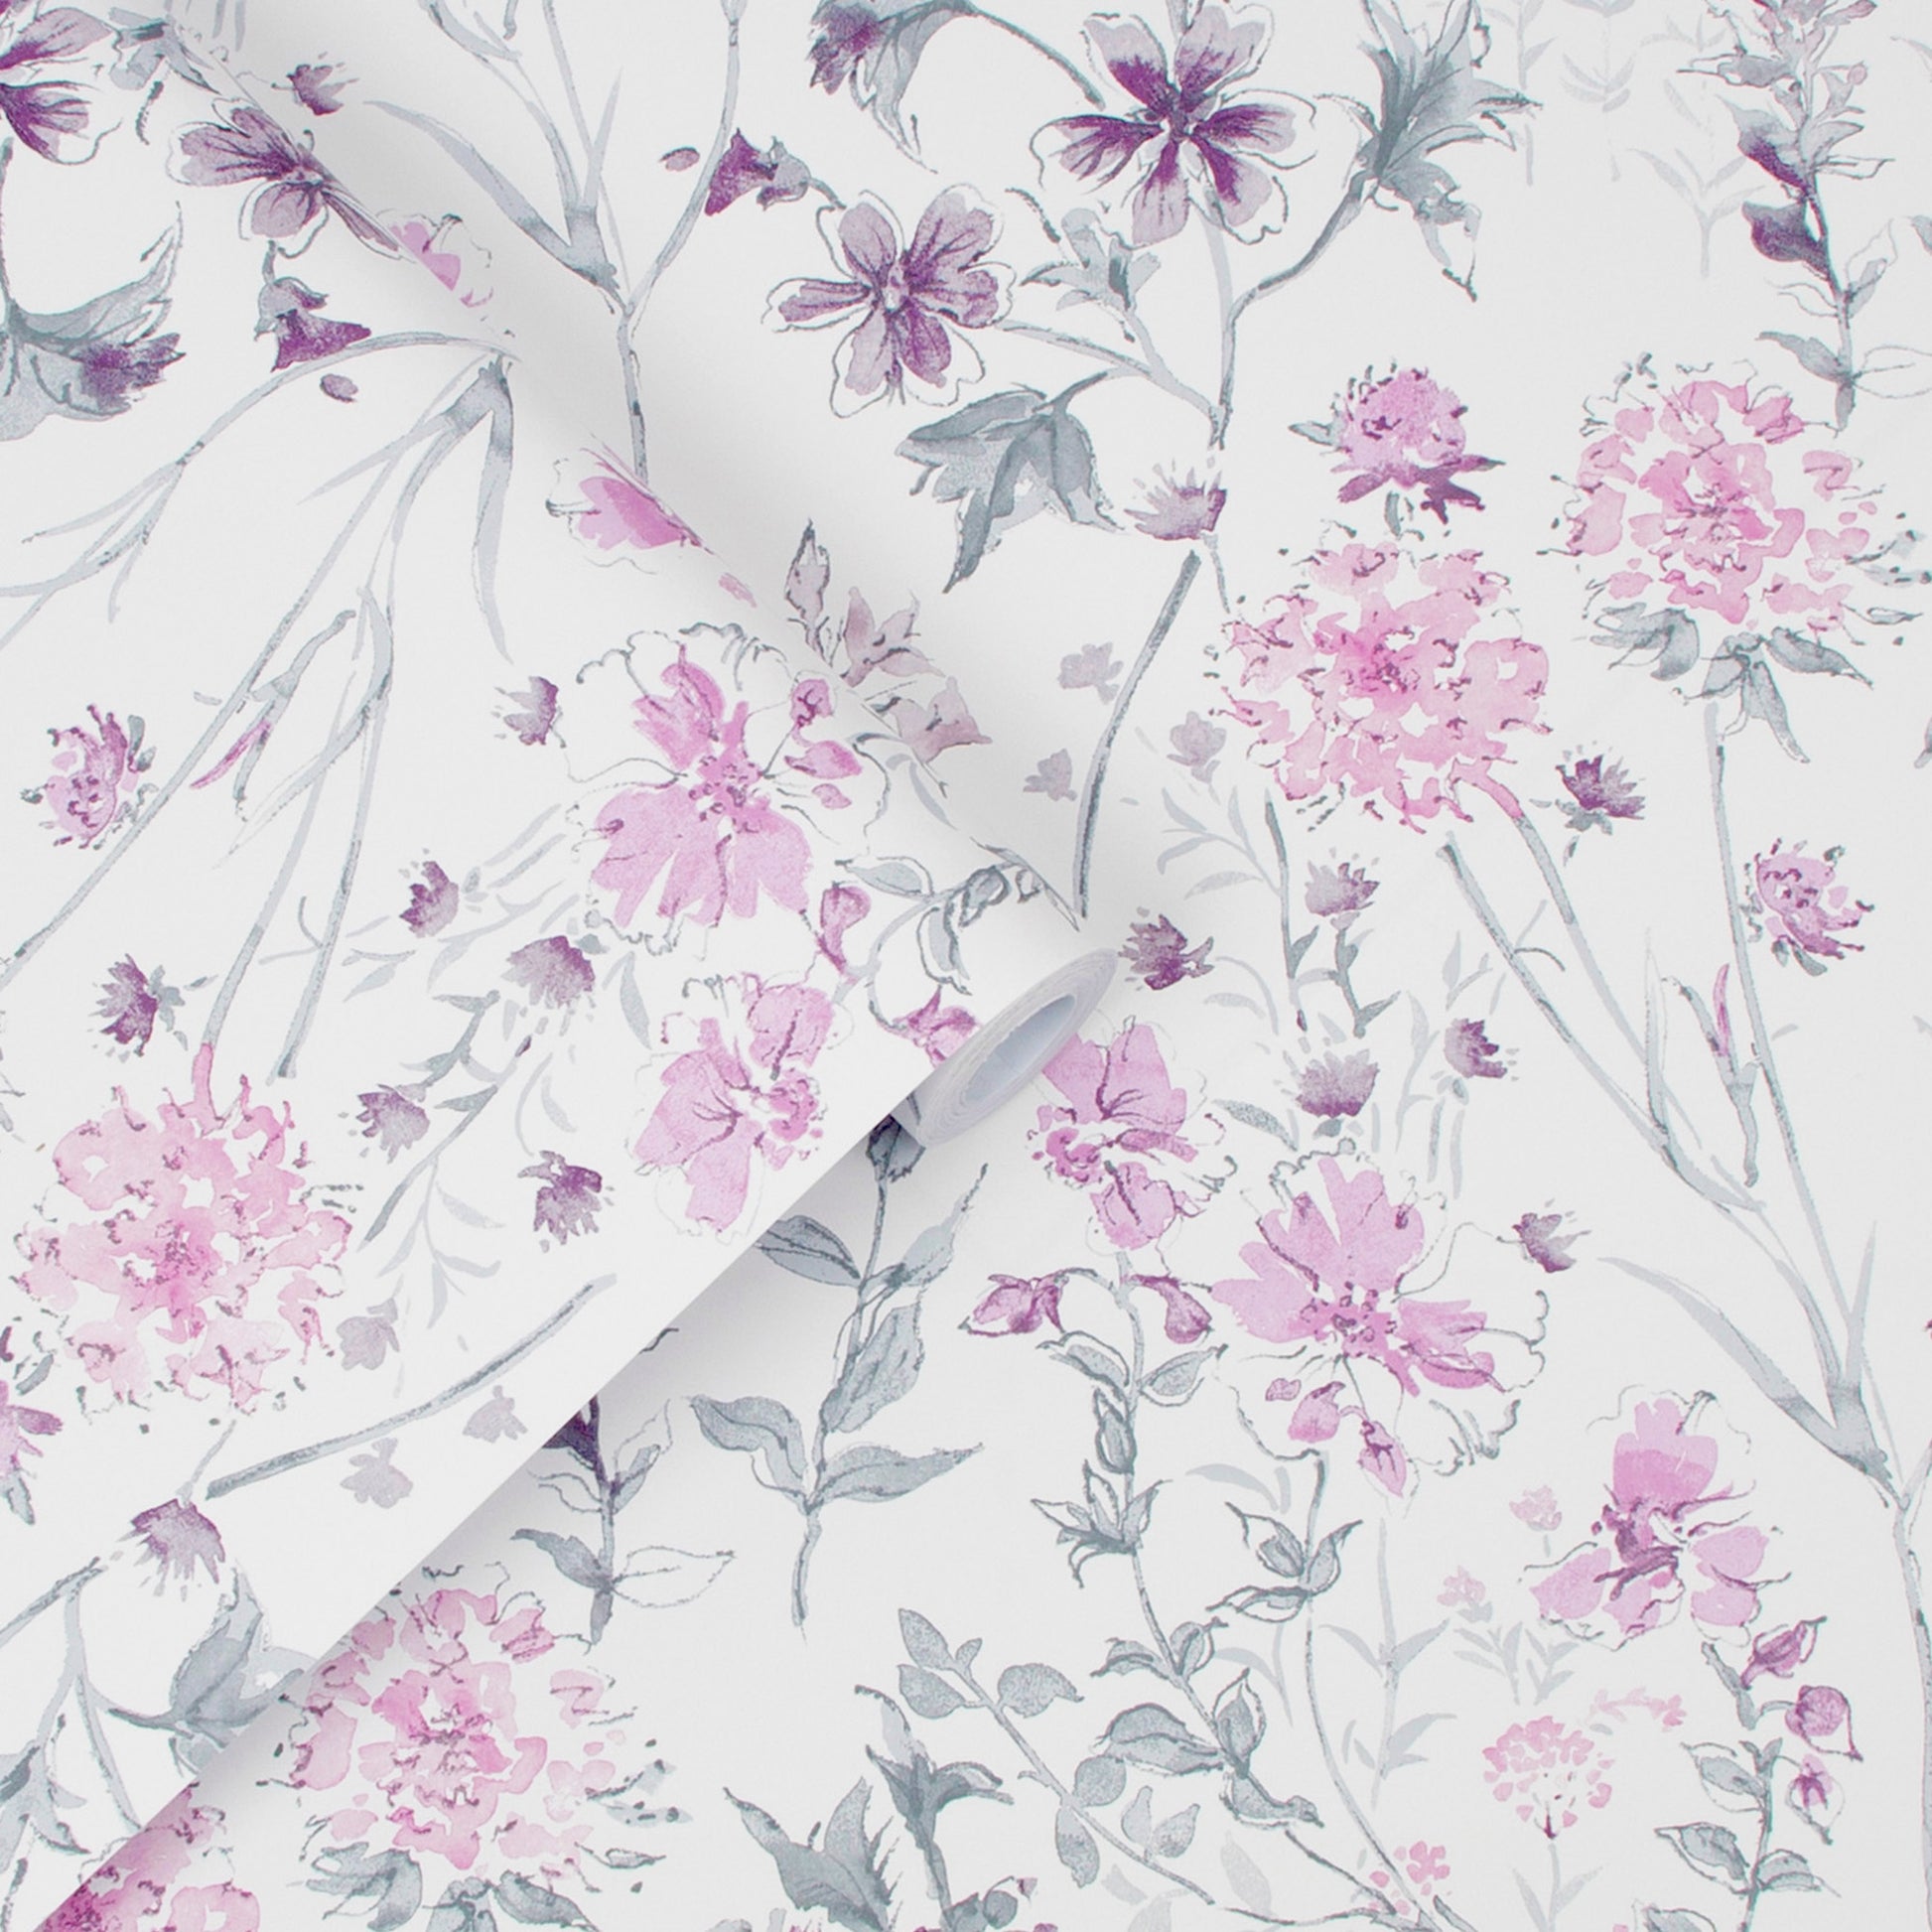 Purchase Laura Ashley Wallpaper Product 113362 Wild Meadow Pale Iris